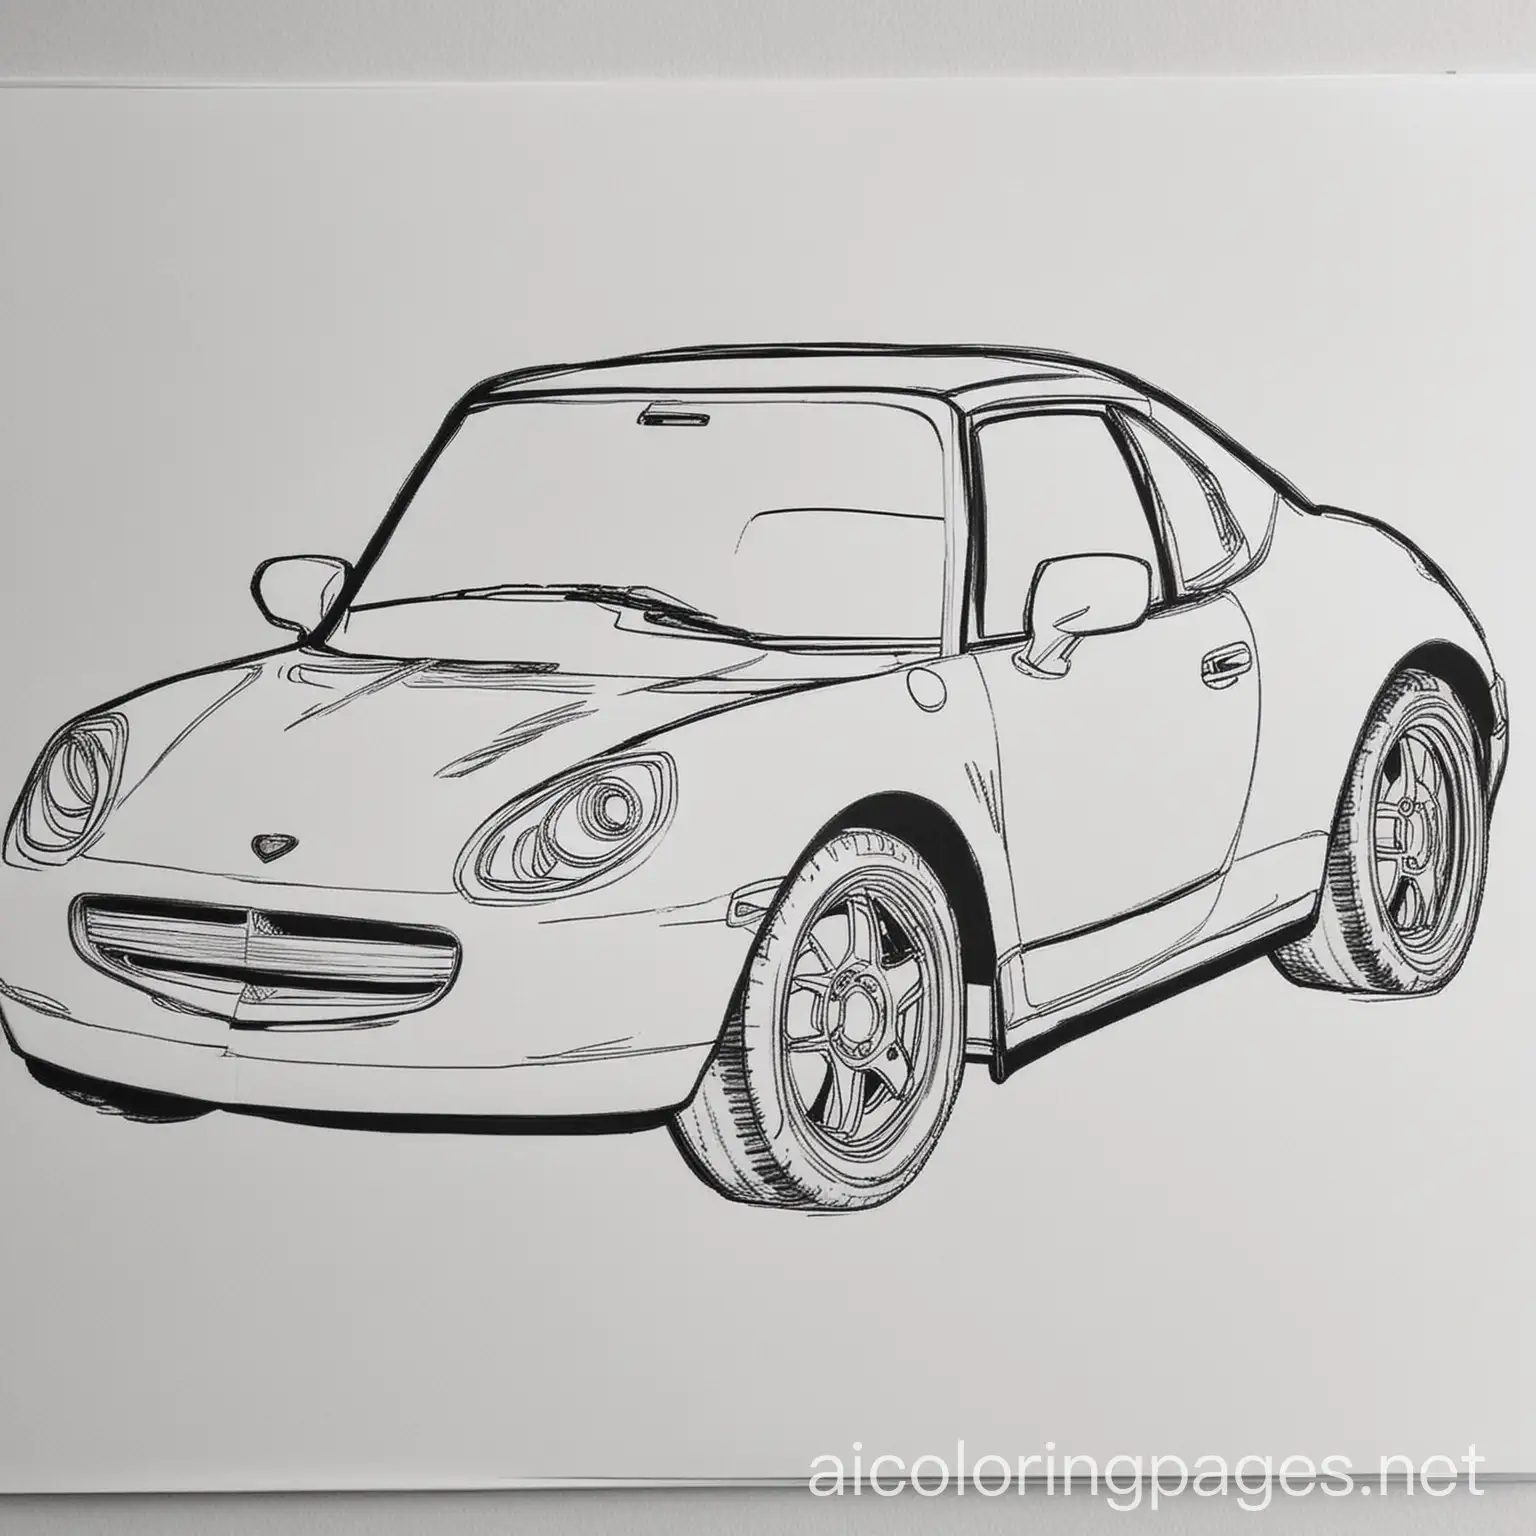 Cars, Coloring Page, black and white, line art, white background, Simplicity, Ample White Space. The background of the coloring page is plain white to make it easy for young children to color within the lines. The outlines of all the subjects are easy to distinguish, making it simple for kids to color without too much difficulty